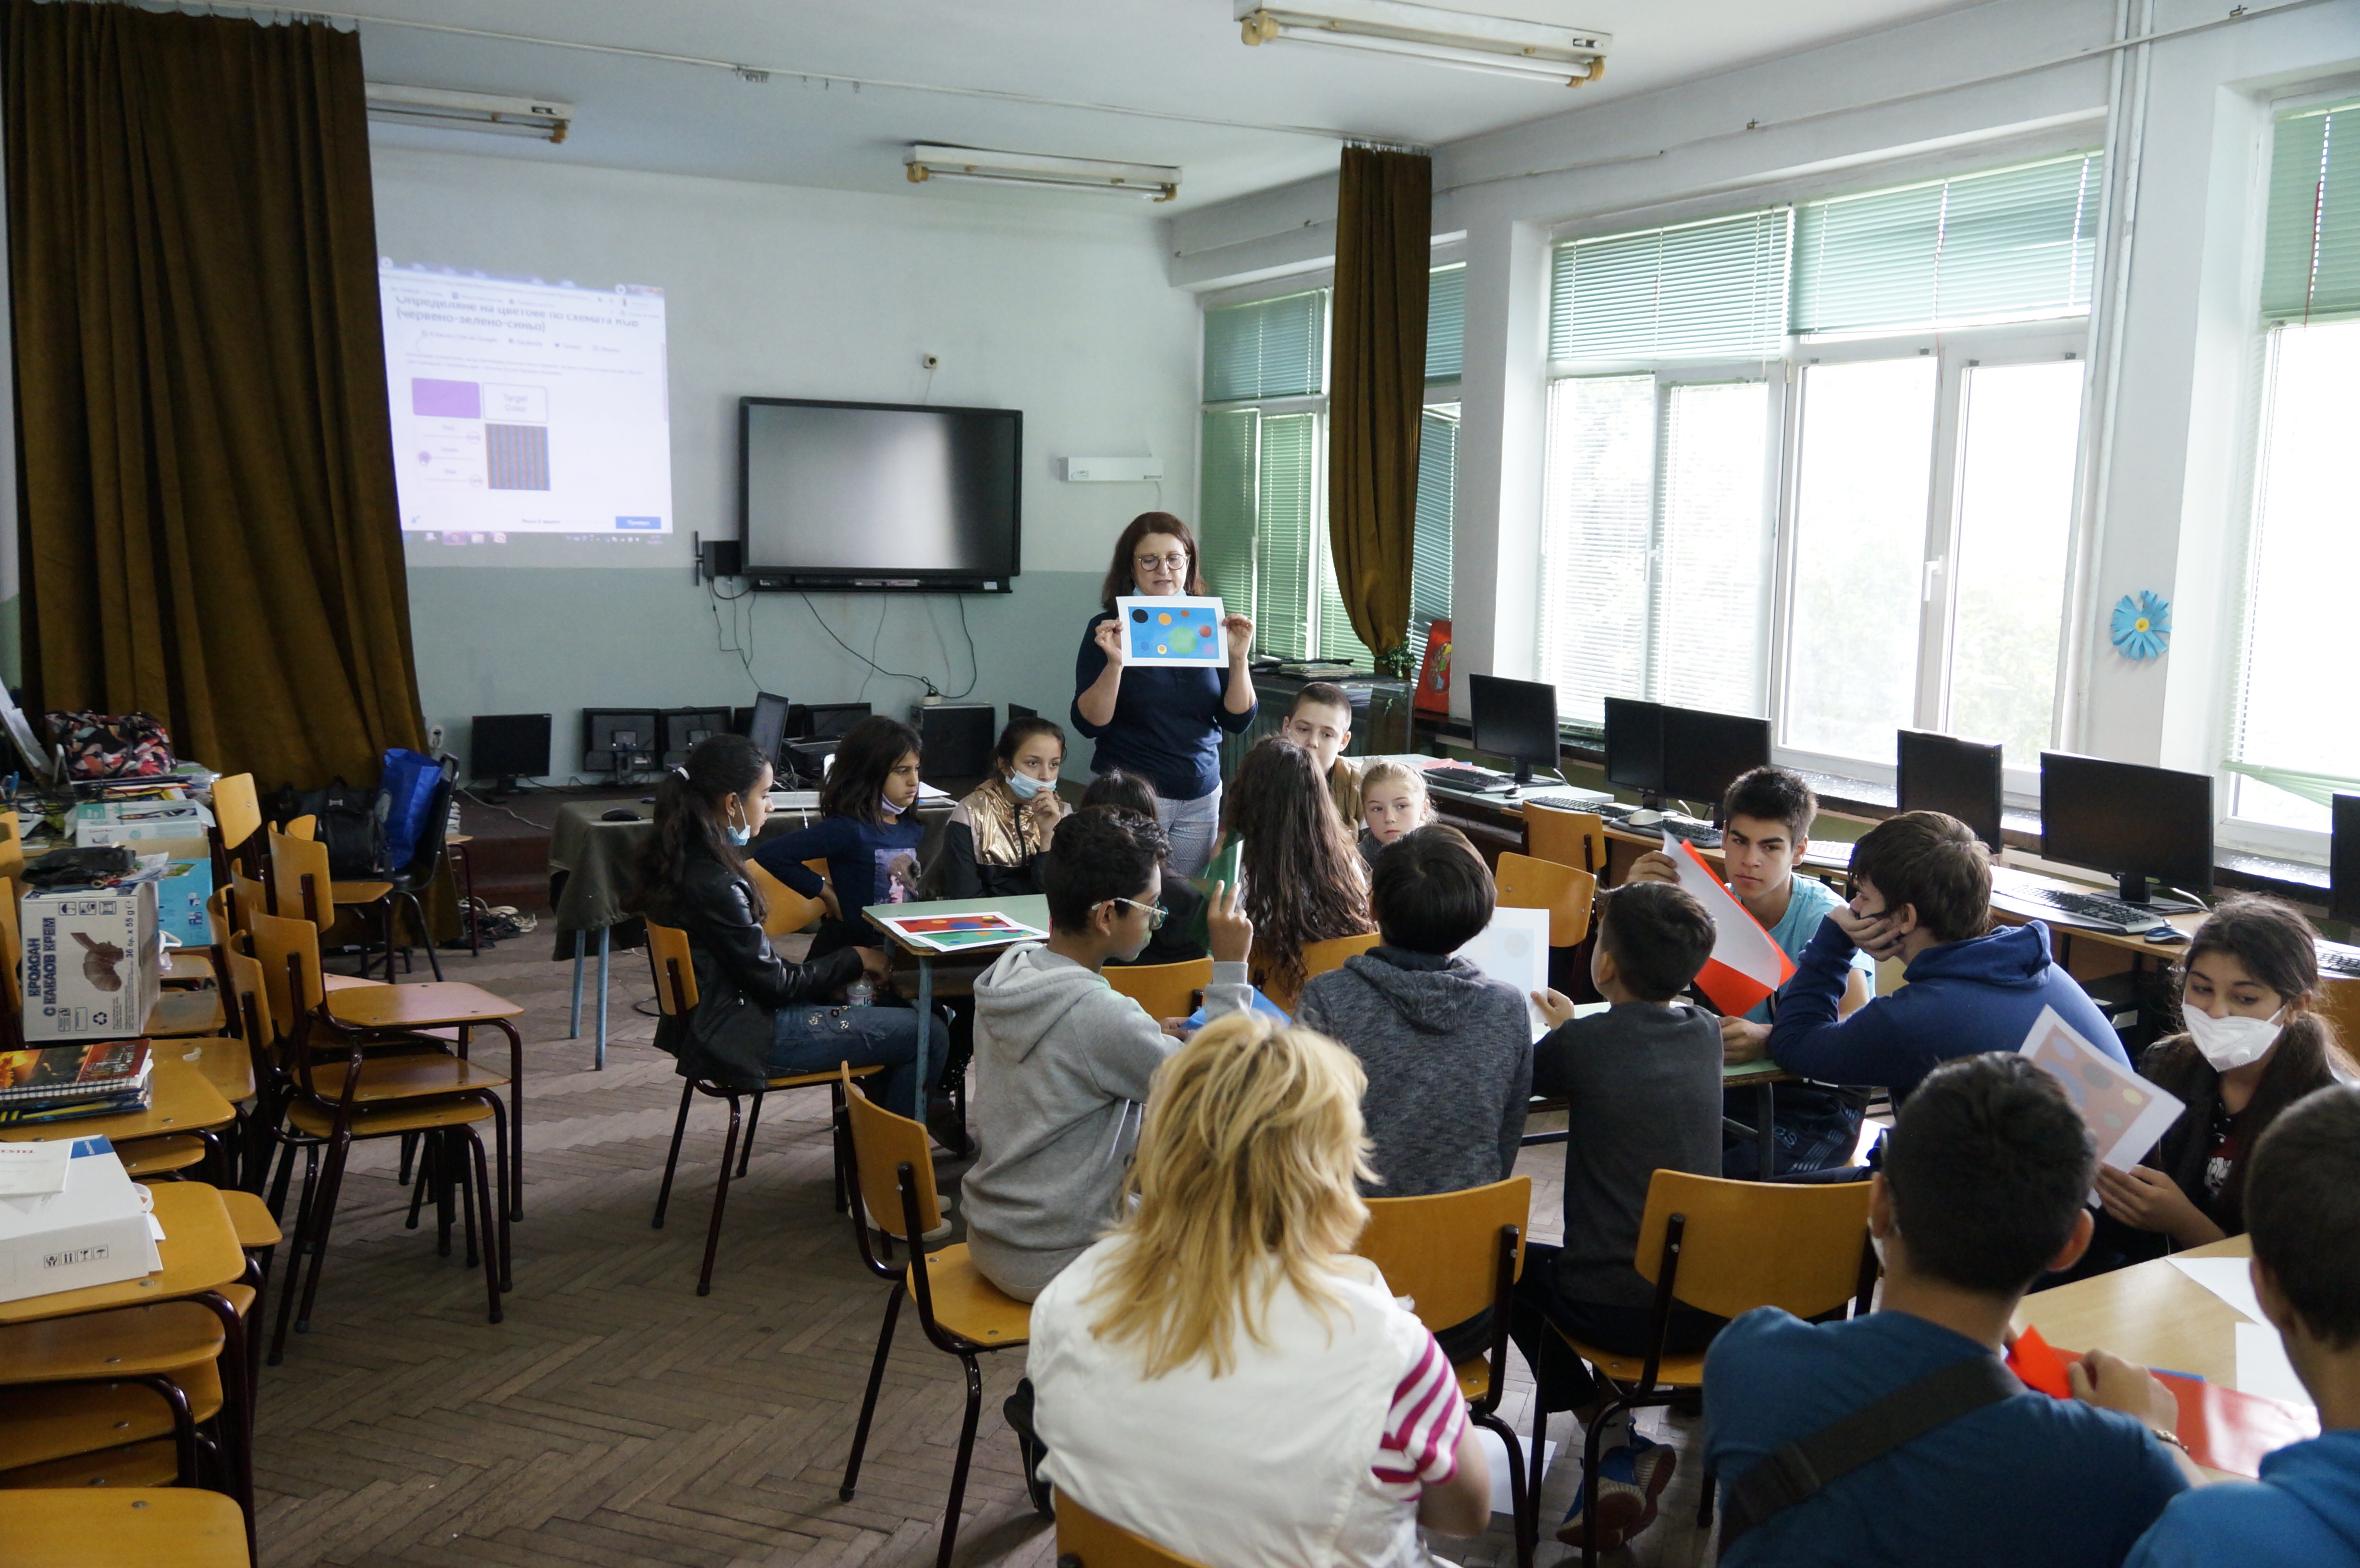 Тhe Activity "Explore the colours" from the Steam4sen Educational Toolkit inspired many students in 124 School in Sofia